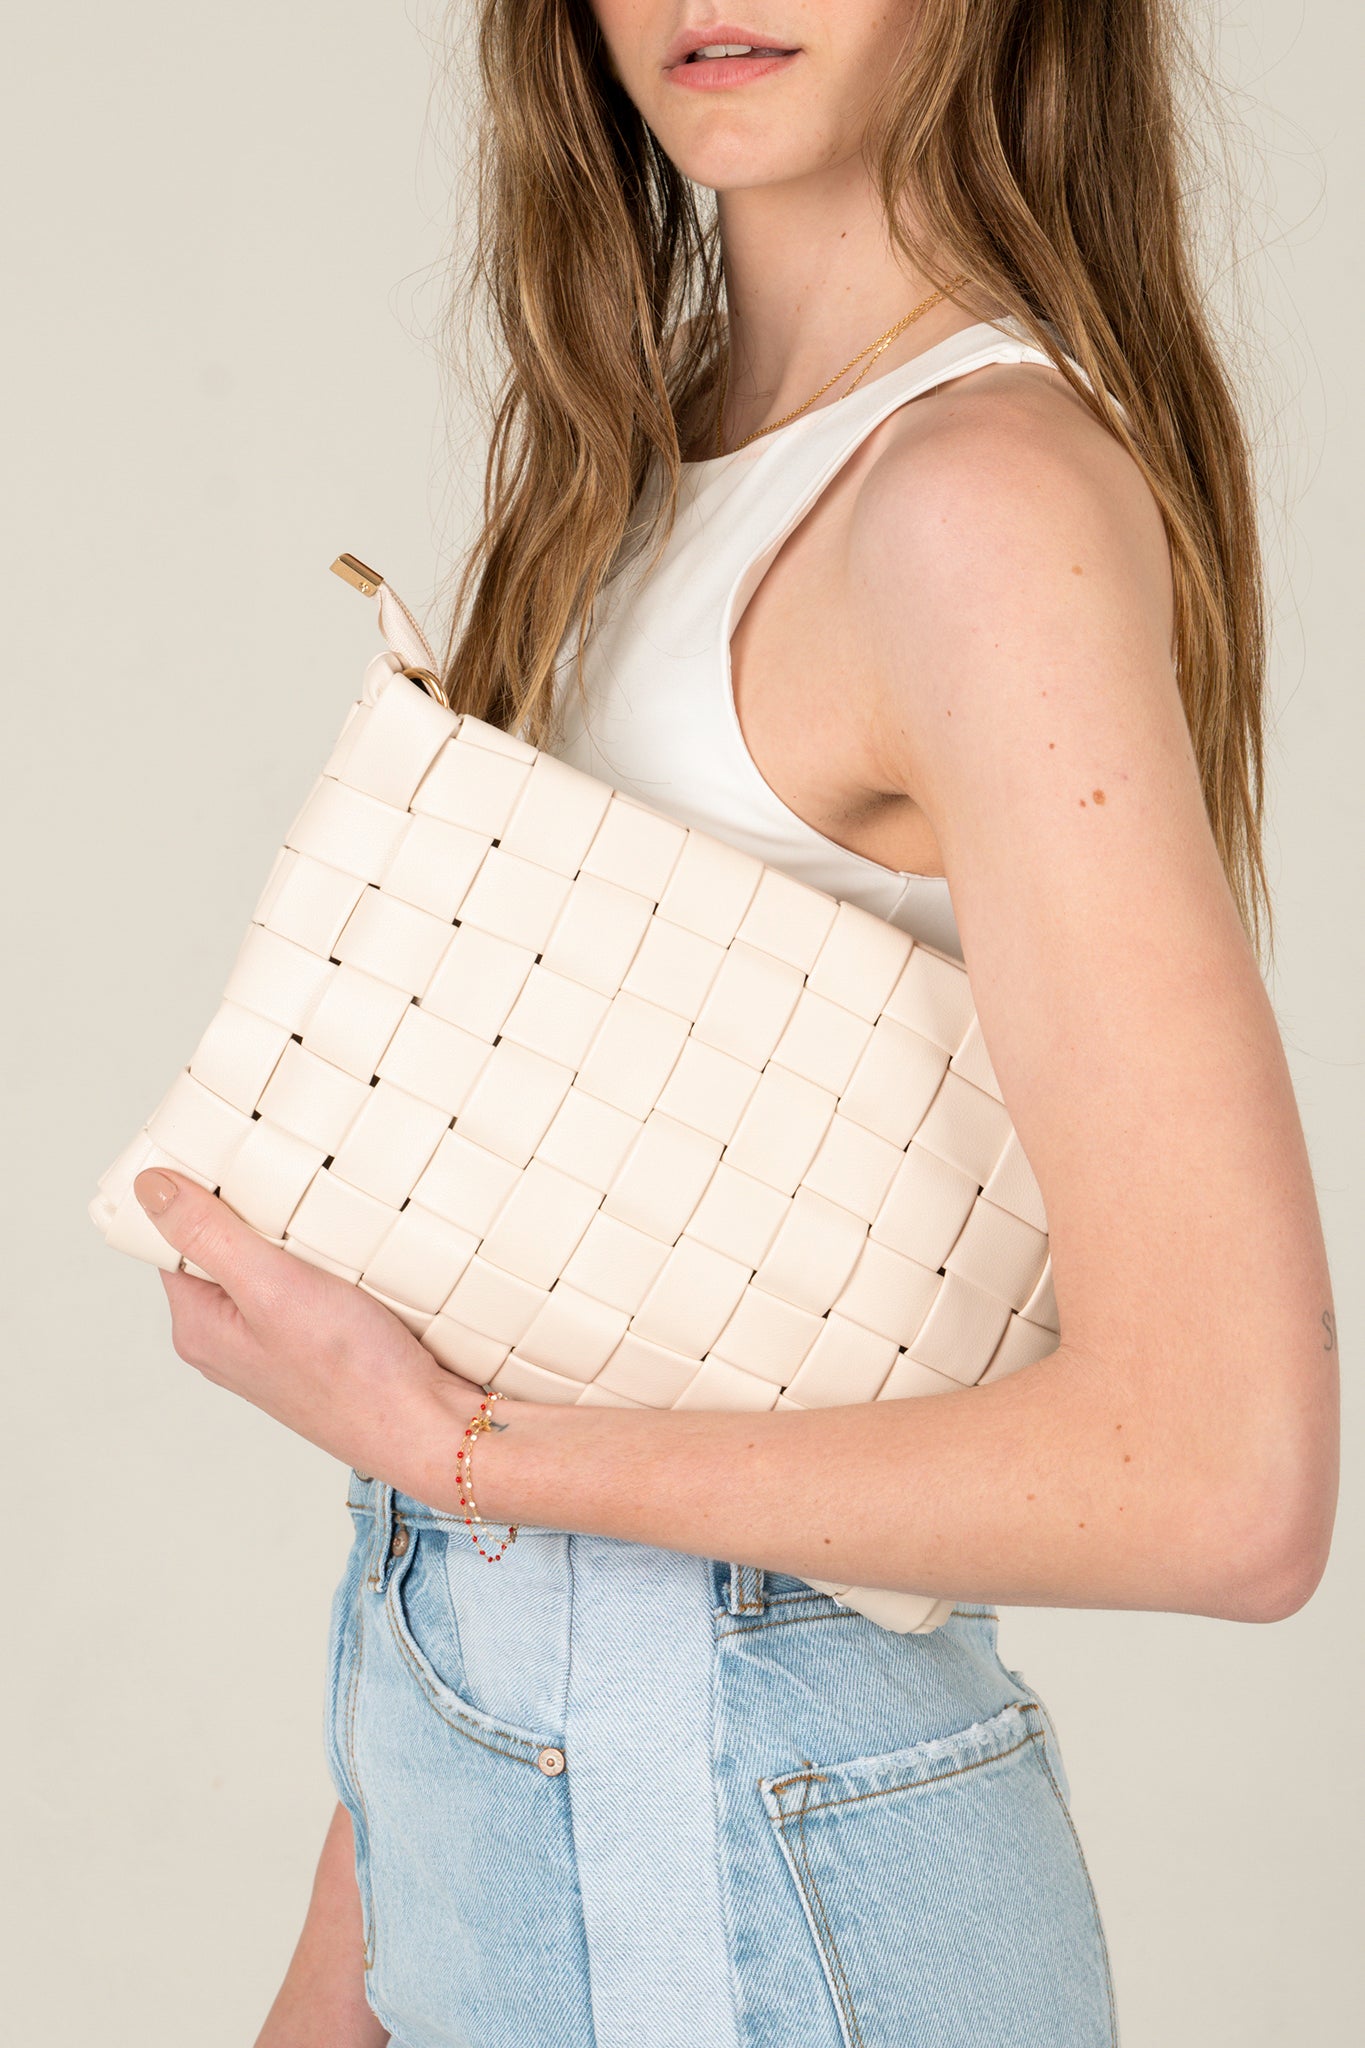 View 1 of Keen Woven Clutch in Ivory, a Bags from Larrea Cove. Detail: The Keen Woven Clutch in Ivory is a stylish and practical accessory that ...